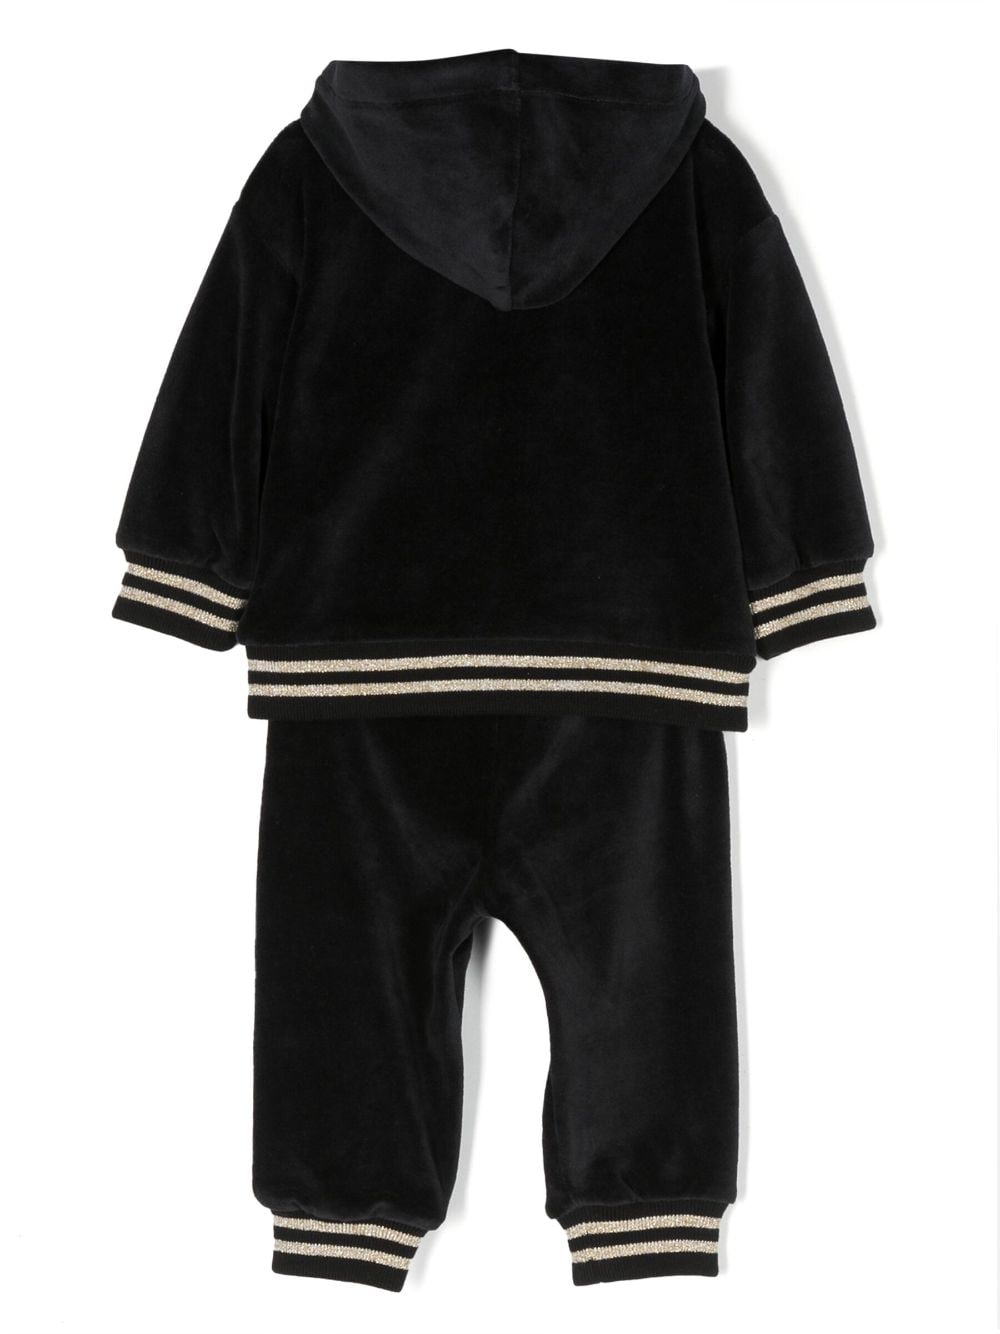 Sports outfit for baby girls in velvet